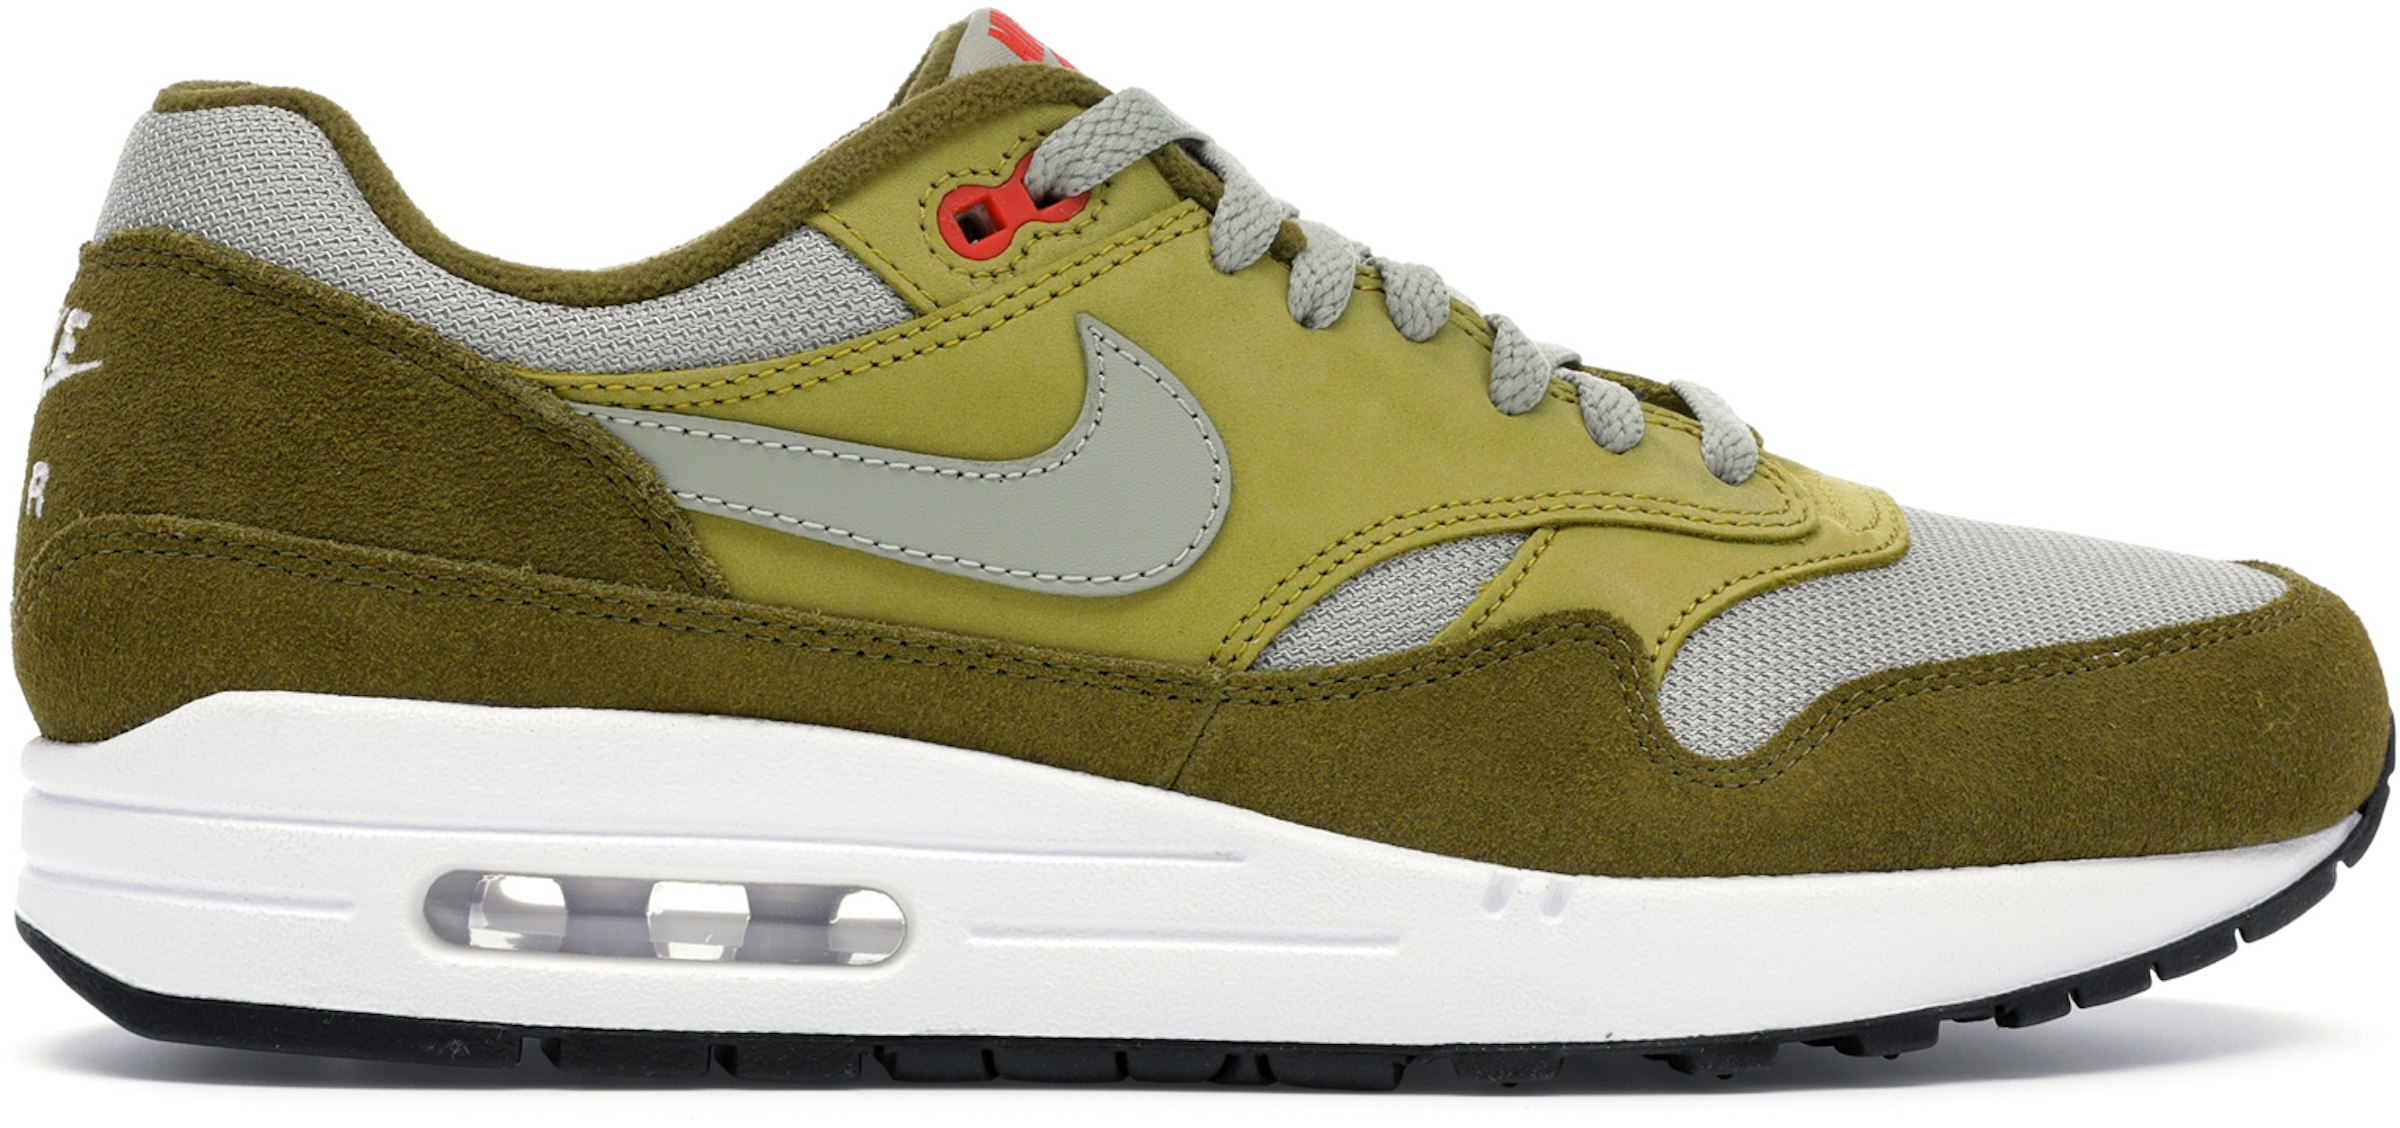 Nike Max 1 Curry Pack (Olive) - 908366-300 - US